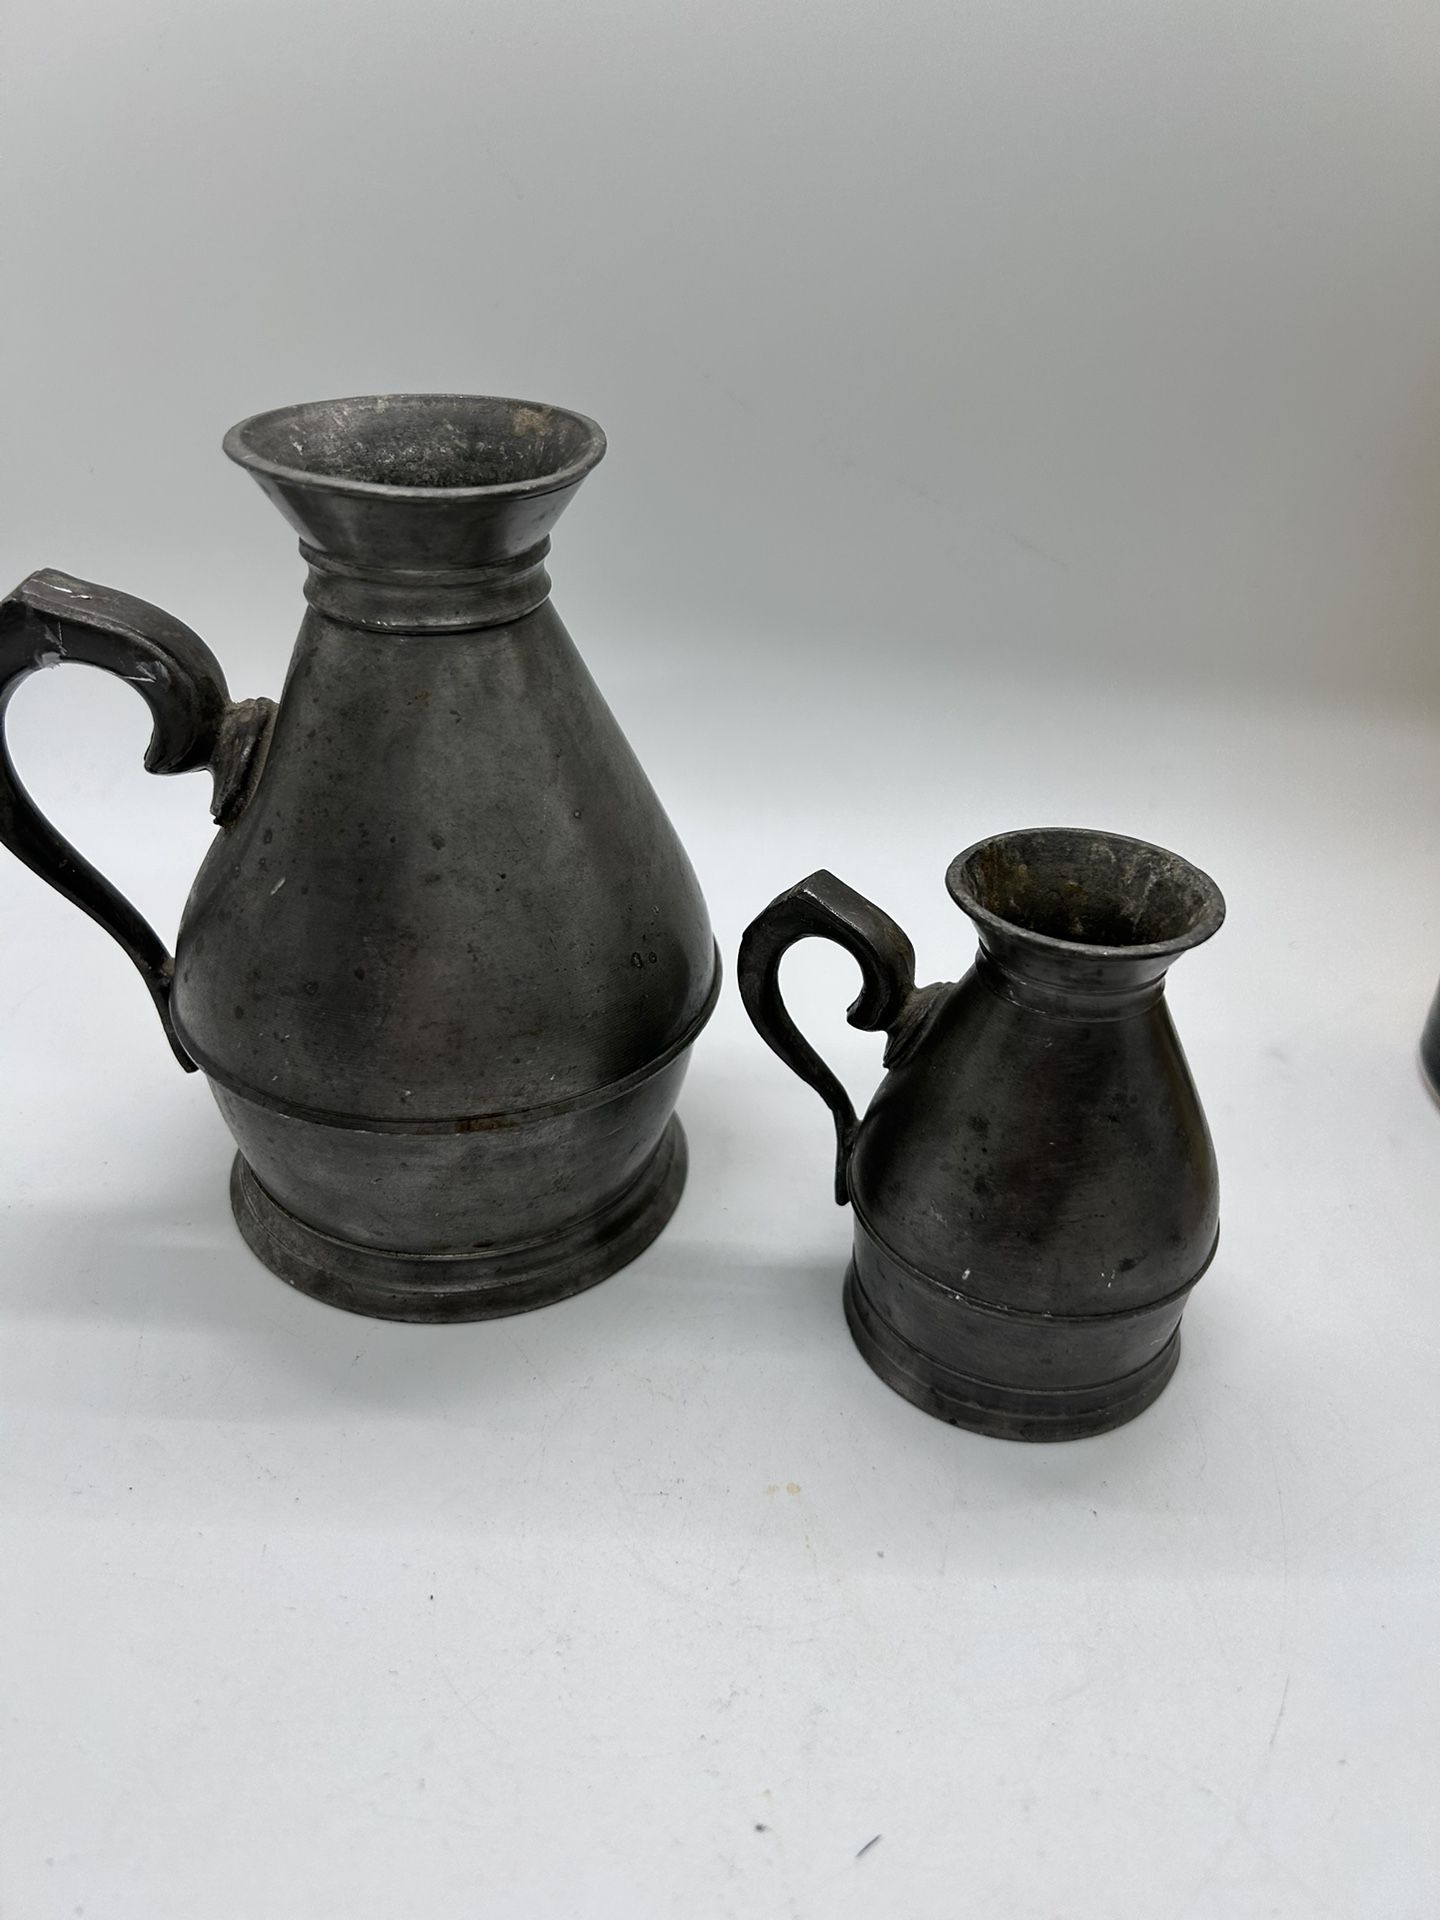 Pewter Haystack Measures 1800s Made In England. Set Of 2 5” & 3” Pewter Pitcher 15215